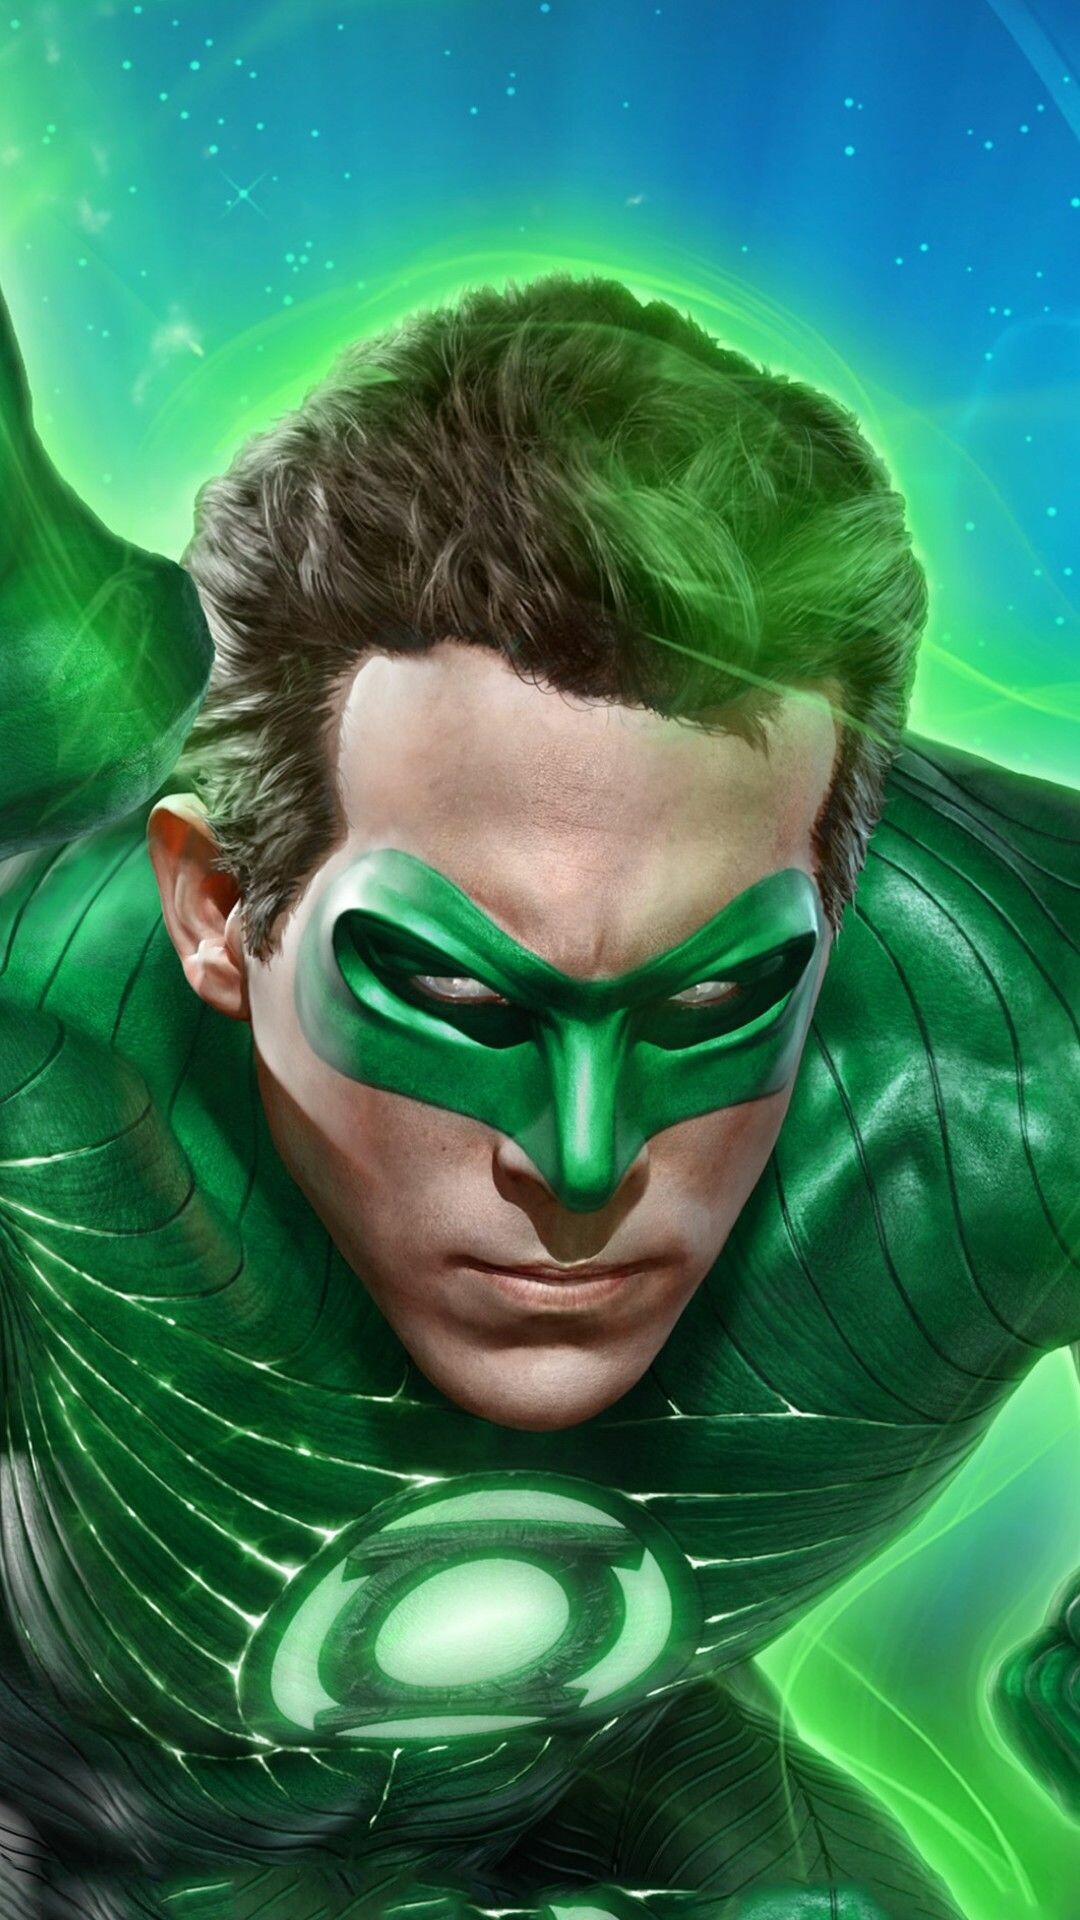 Green Lantern: A test pilot who is selected to become the first human member of an intergalactic police, Ryan Reynolds. 1080x1920 Full HD Wallpaper.